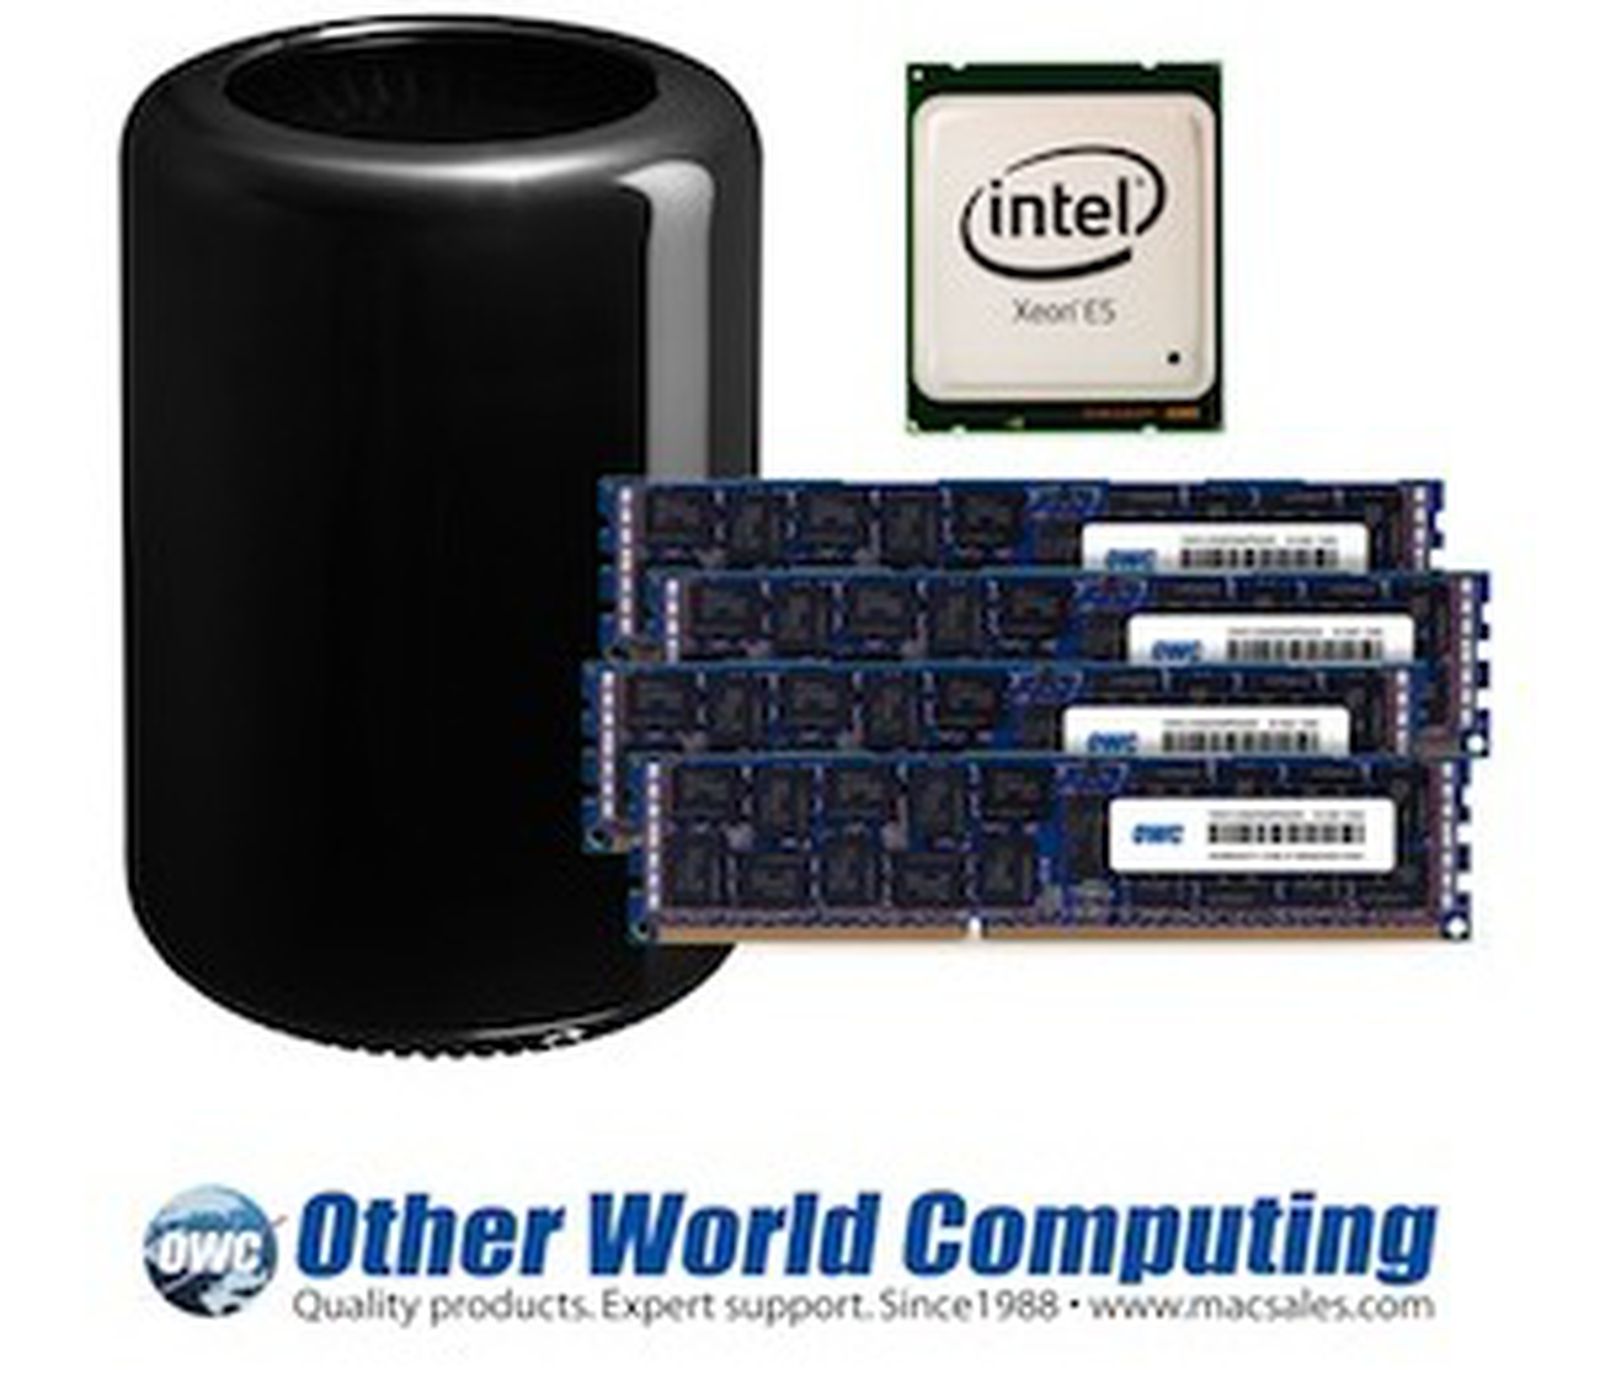 OWC Debuts First Intel Xeon Processor Upgrades for 2013 Mac Pro